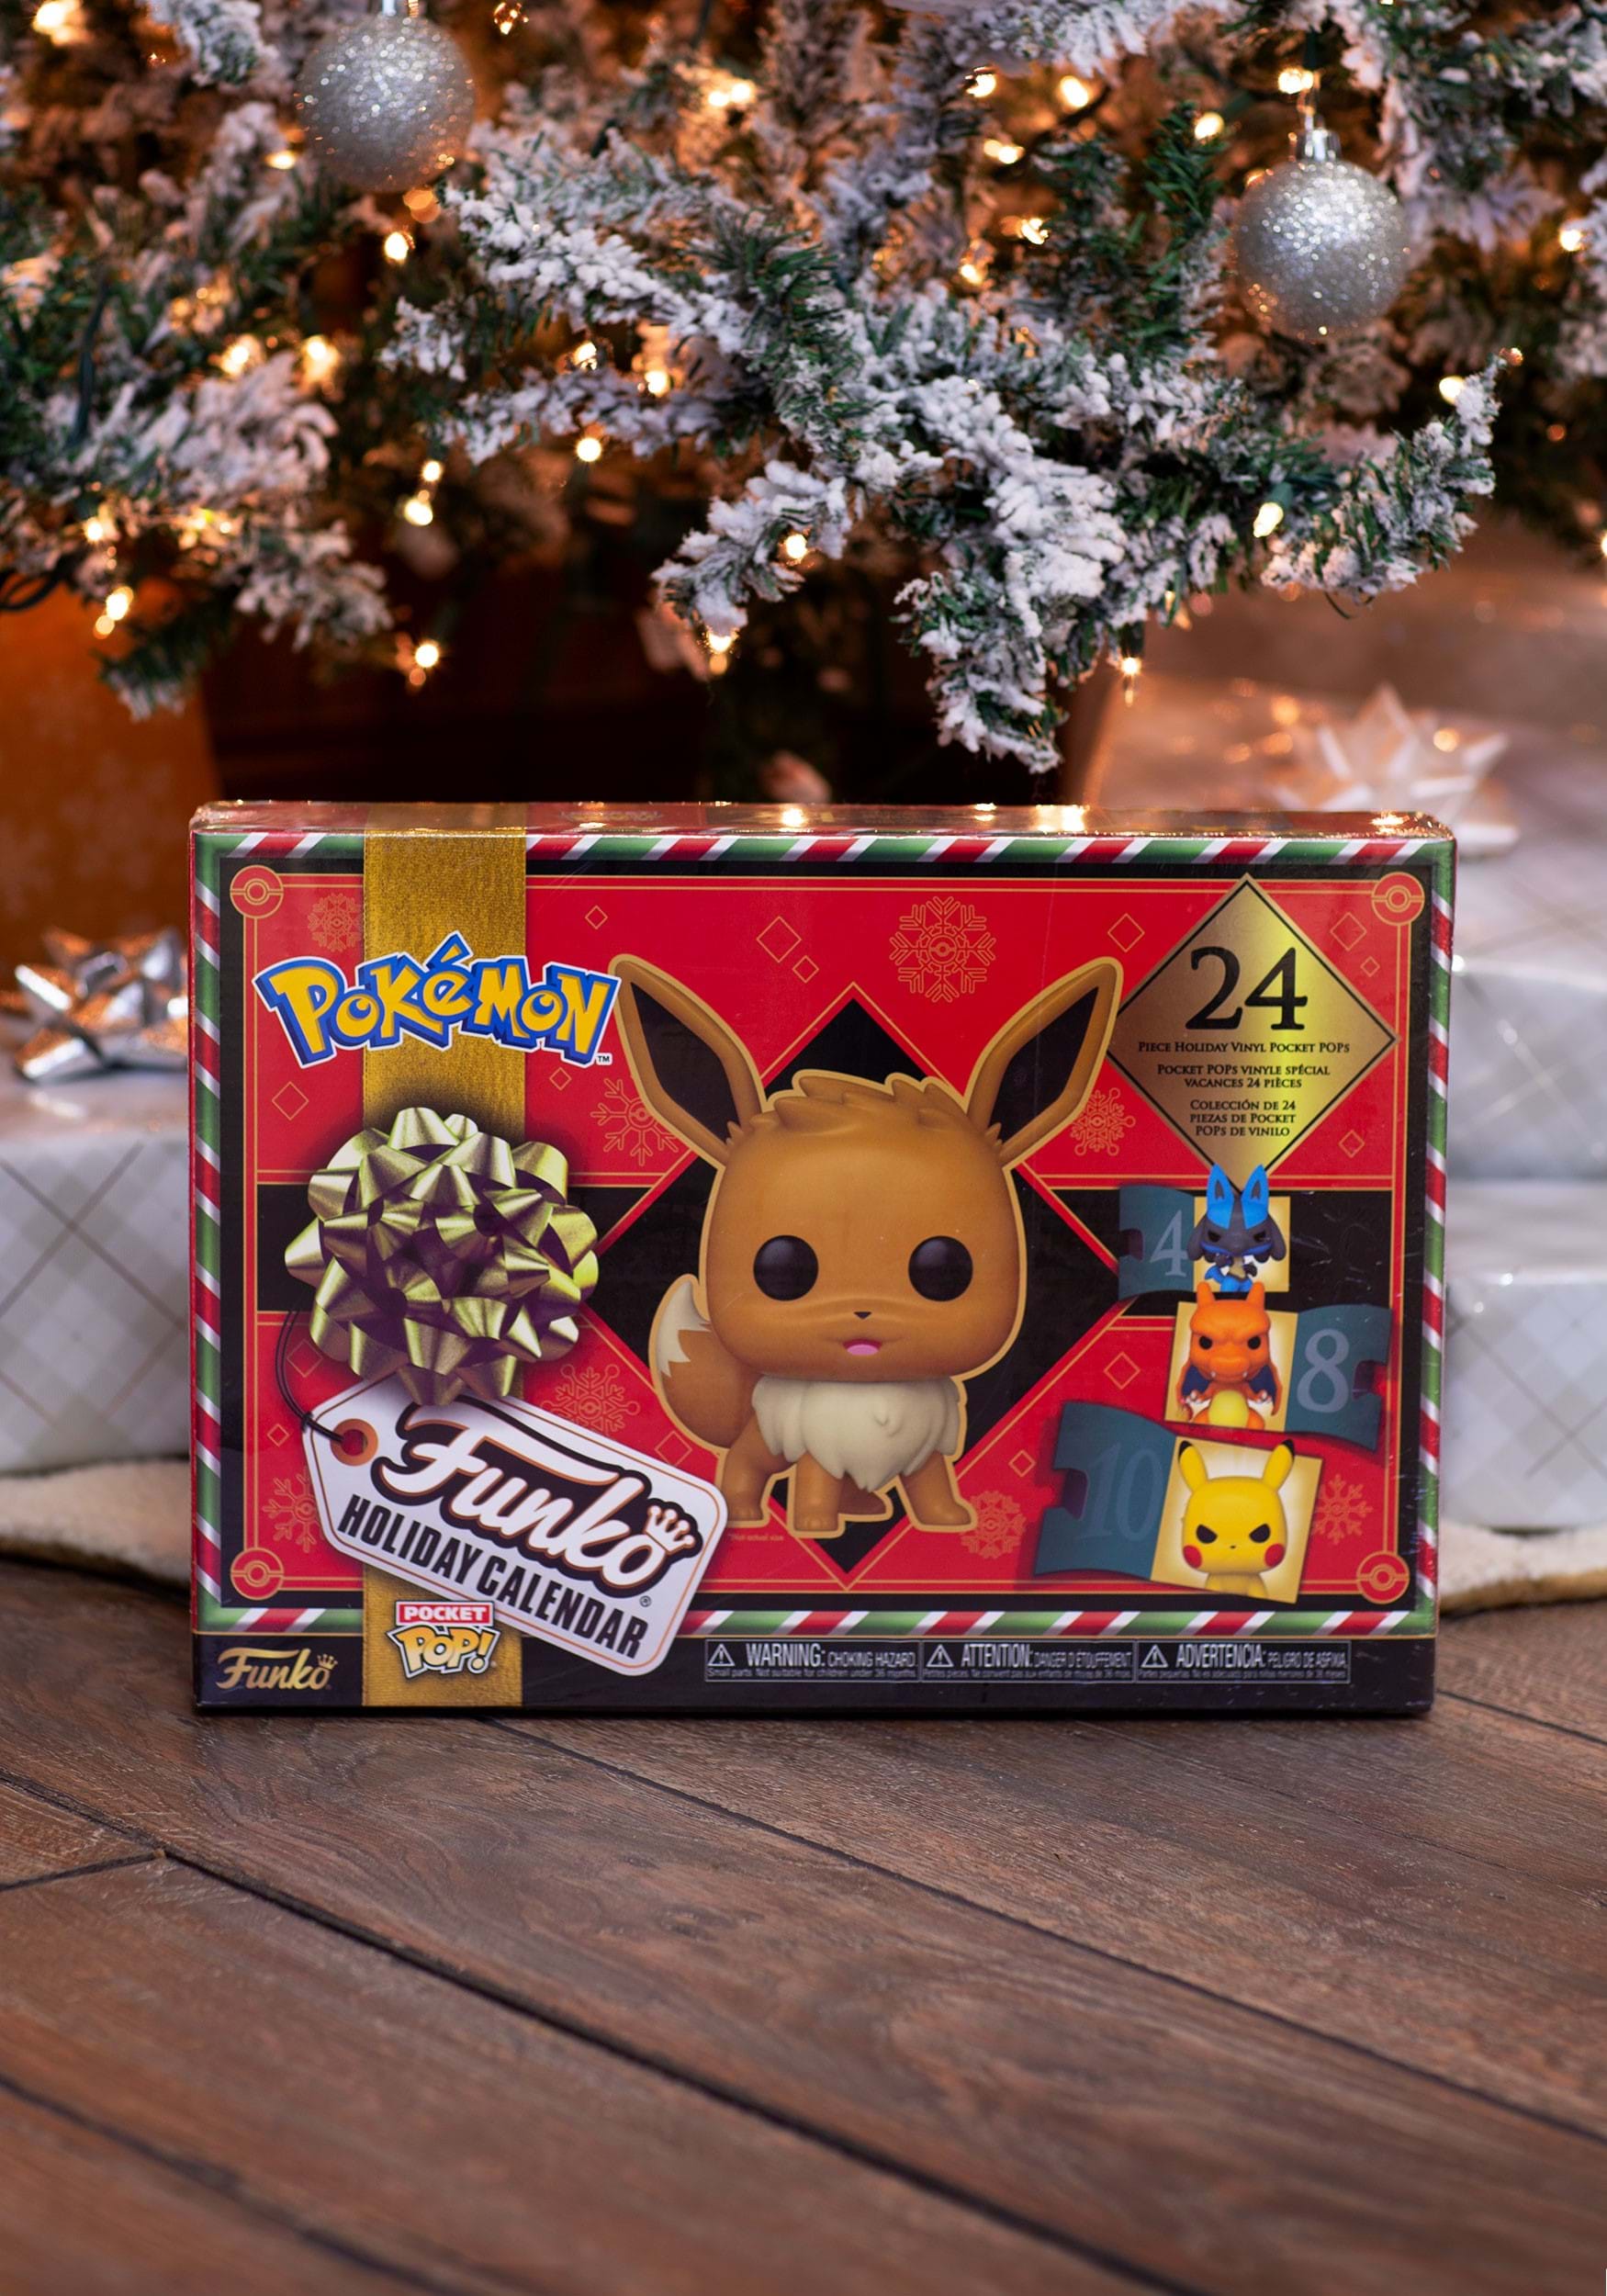 Buy Pocket Pop! The Office 24-Day Holiday Advent Calendar at Funko.